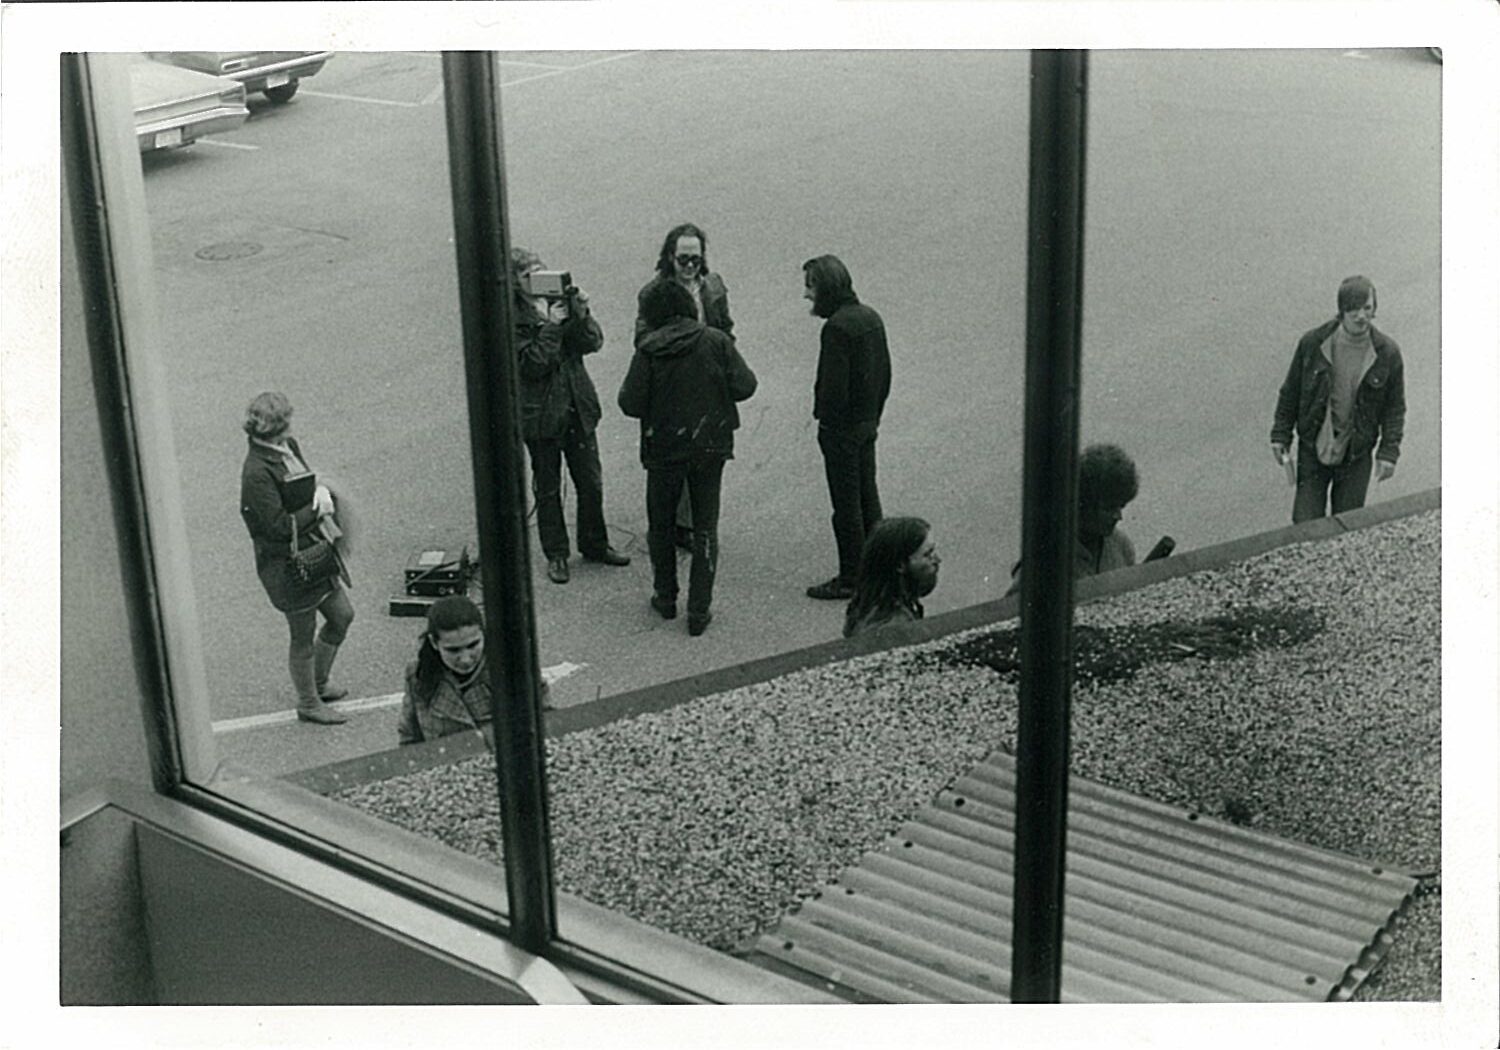 6 people viewed from a window above standing on sidewalk